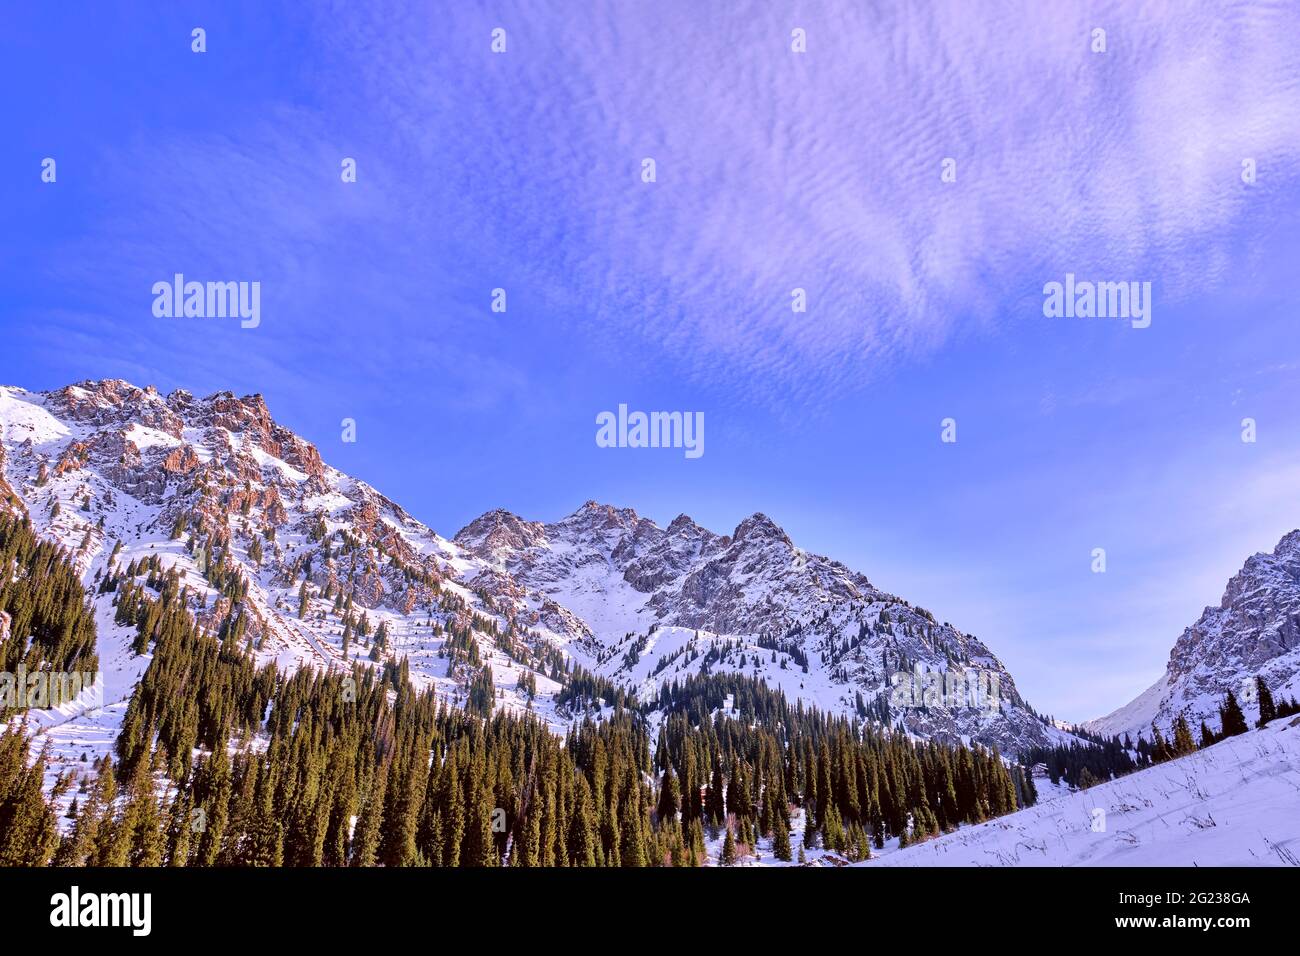 Majestic rocky peaks with fir forest against a blue sky with clouds in the winter season Stock Photo